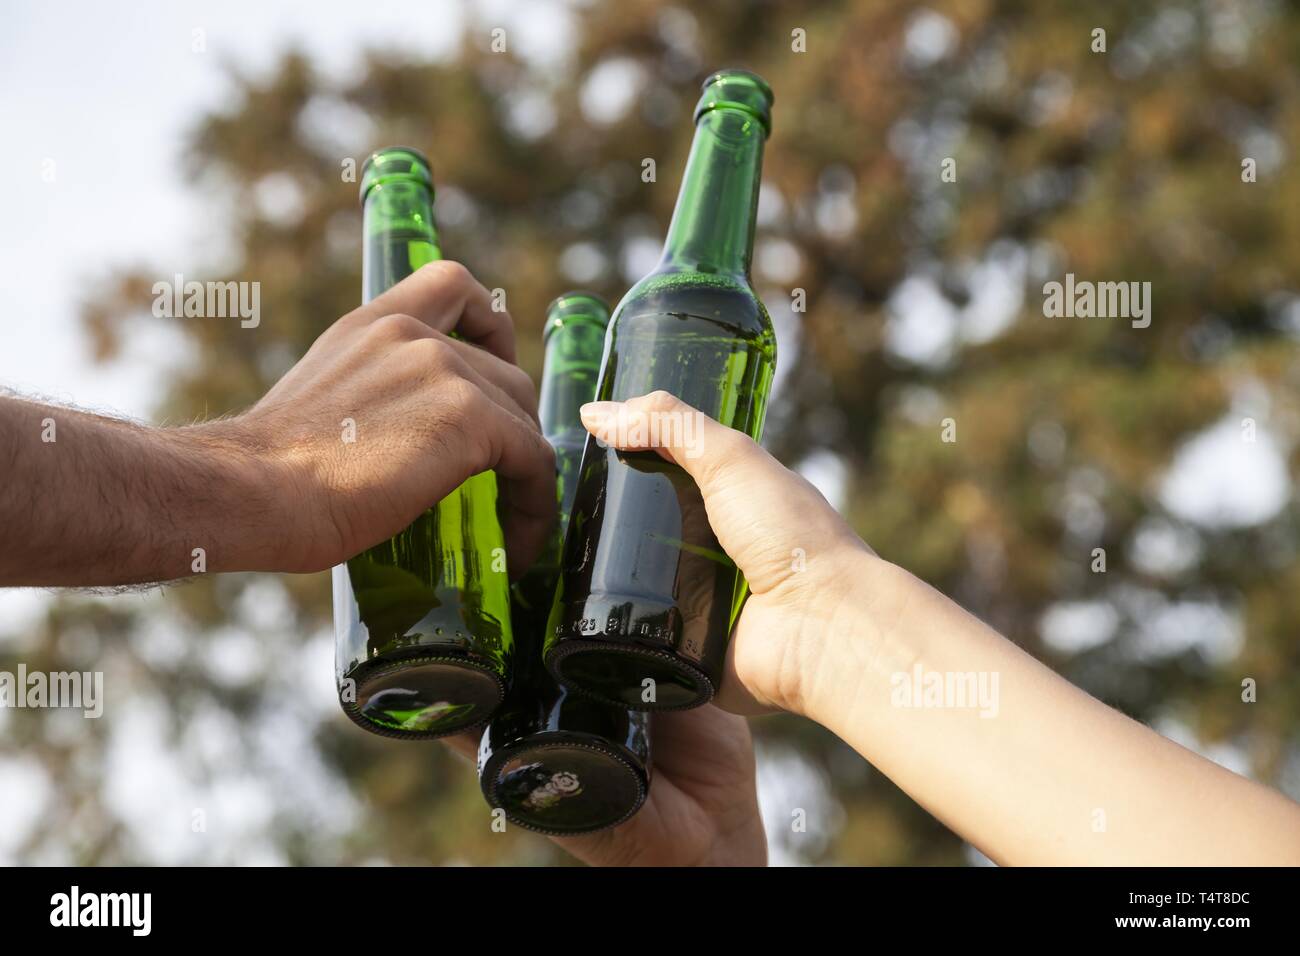 Make a toast with beer bottles, Germany Stock Photo